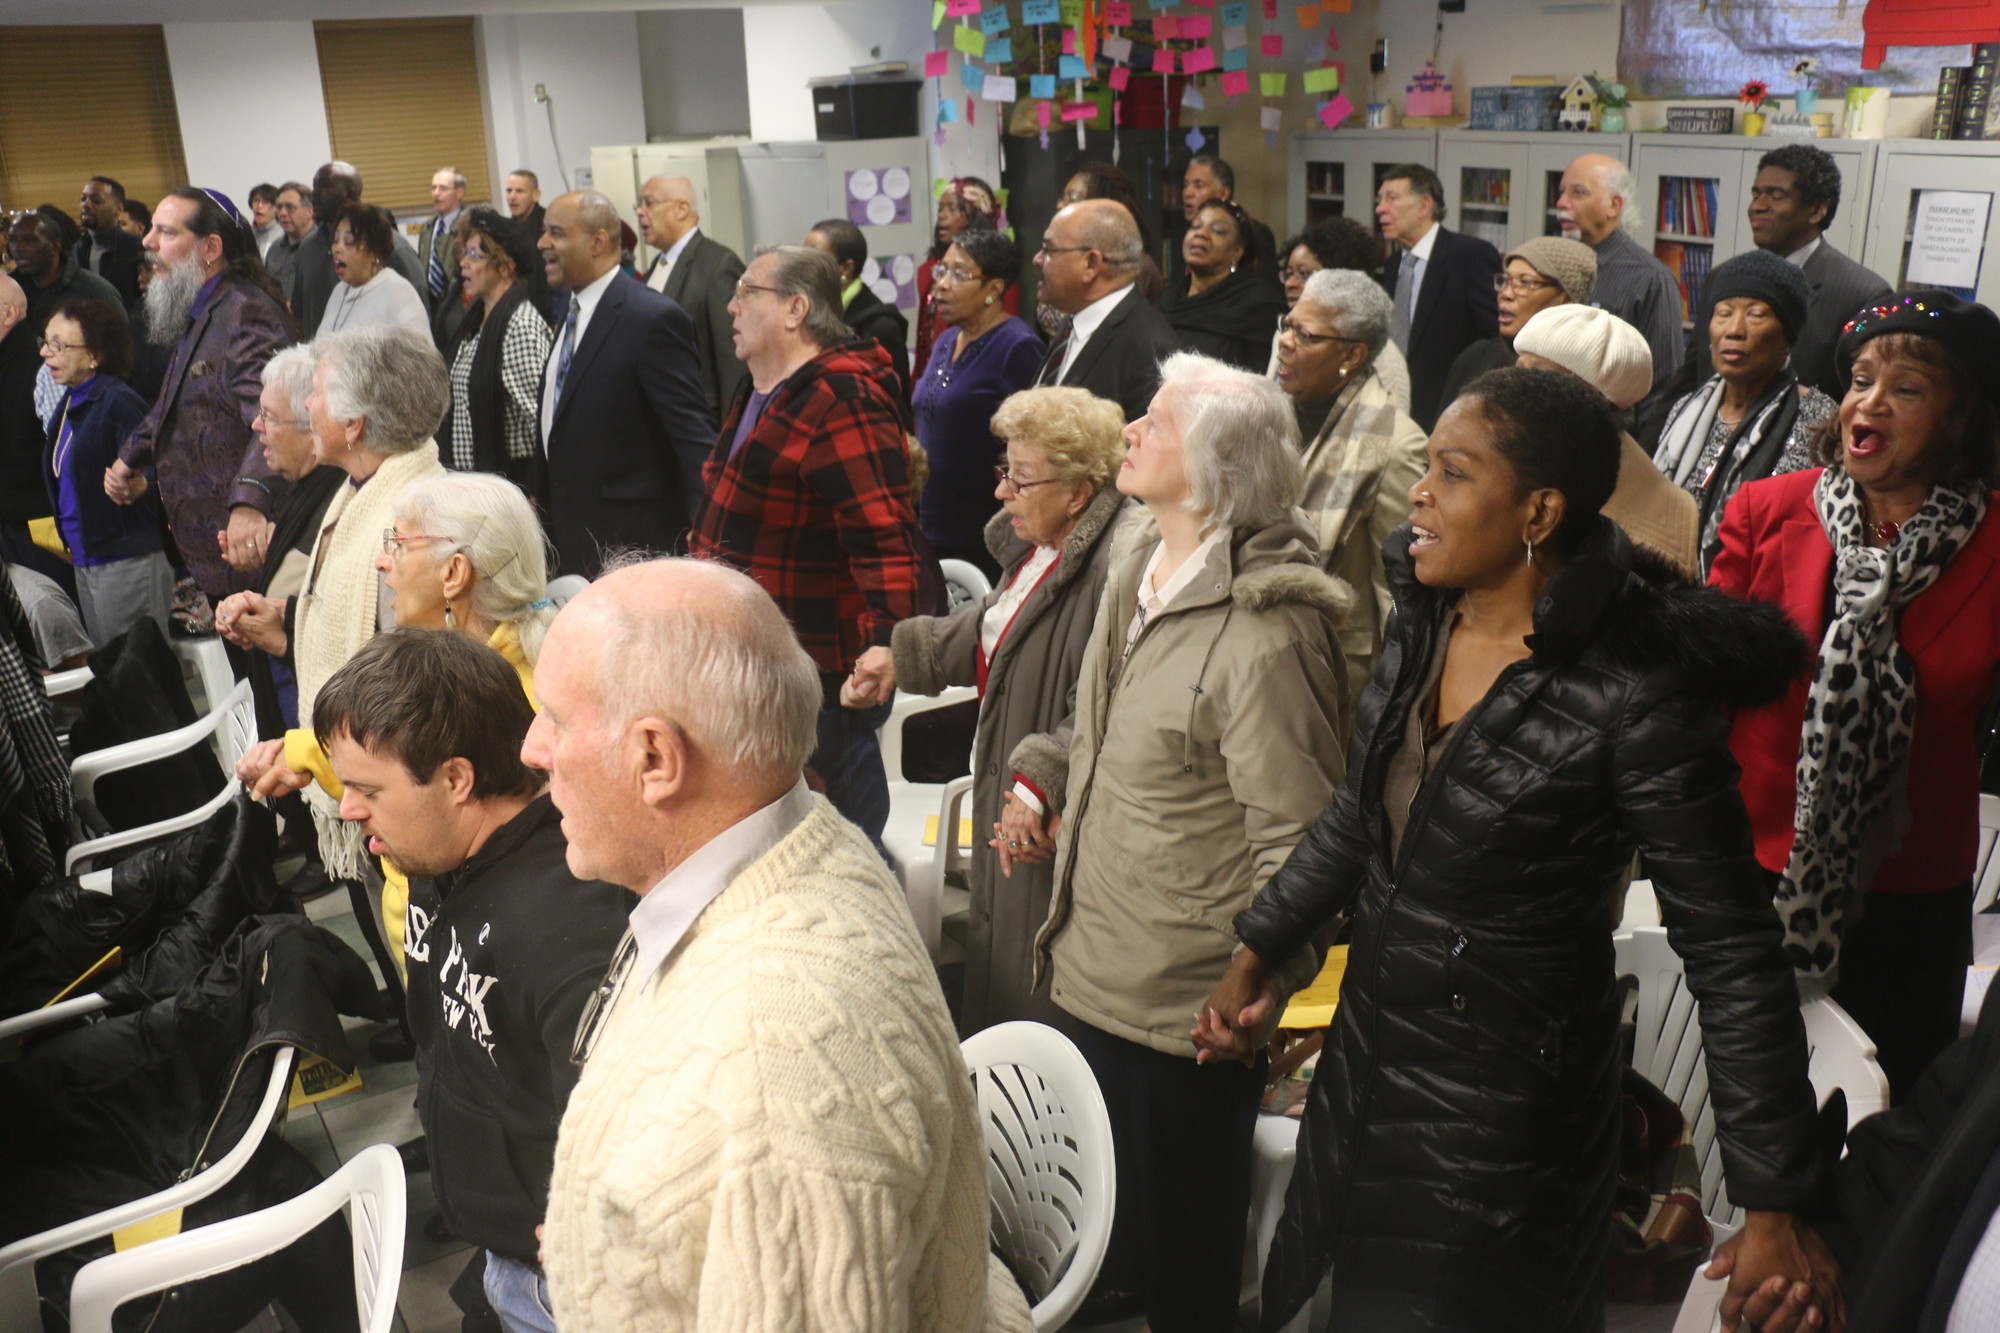 The Valley Stream Religious Council celebrated its MLK Day event at the mosque in Valley Stream.